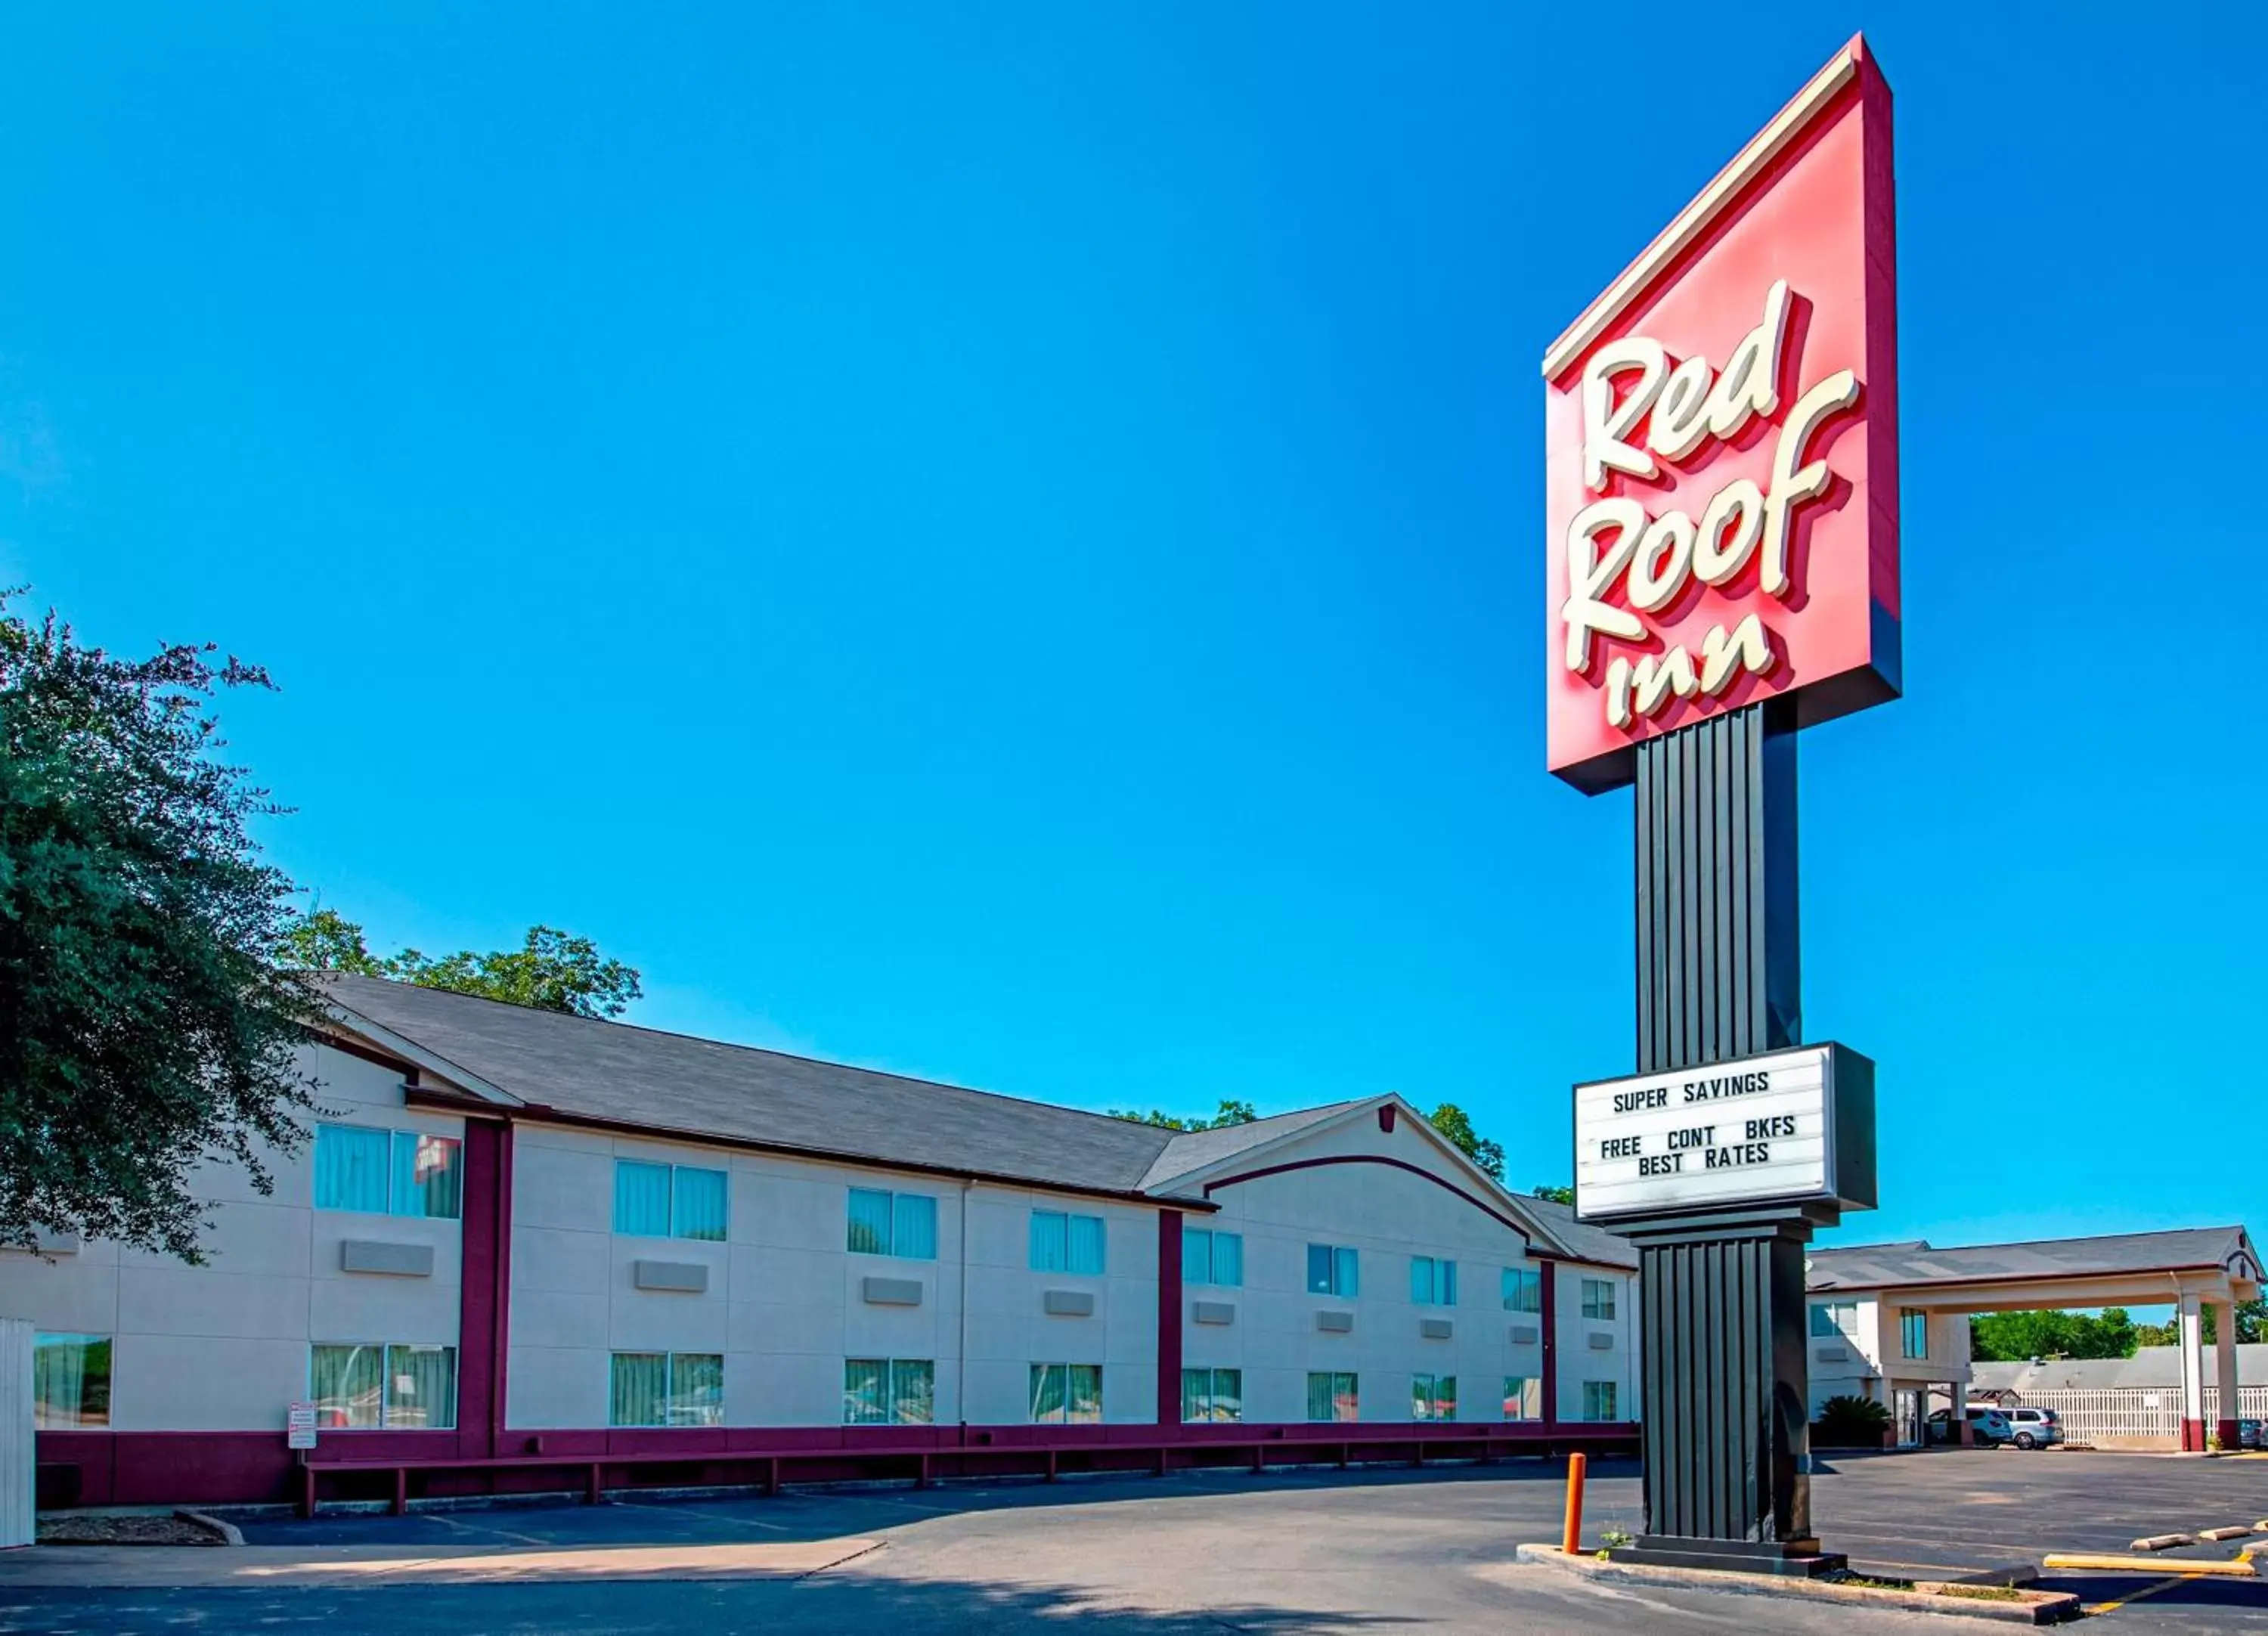 Property Building in Red Roof Inn San Marcos